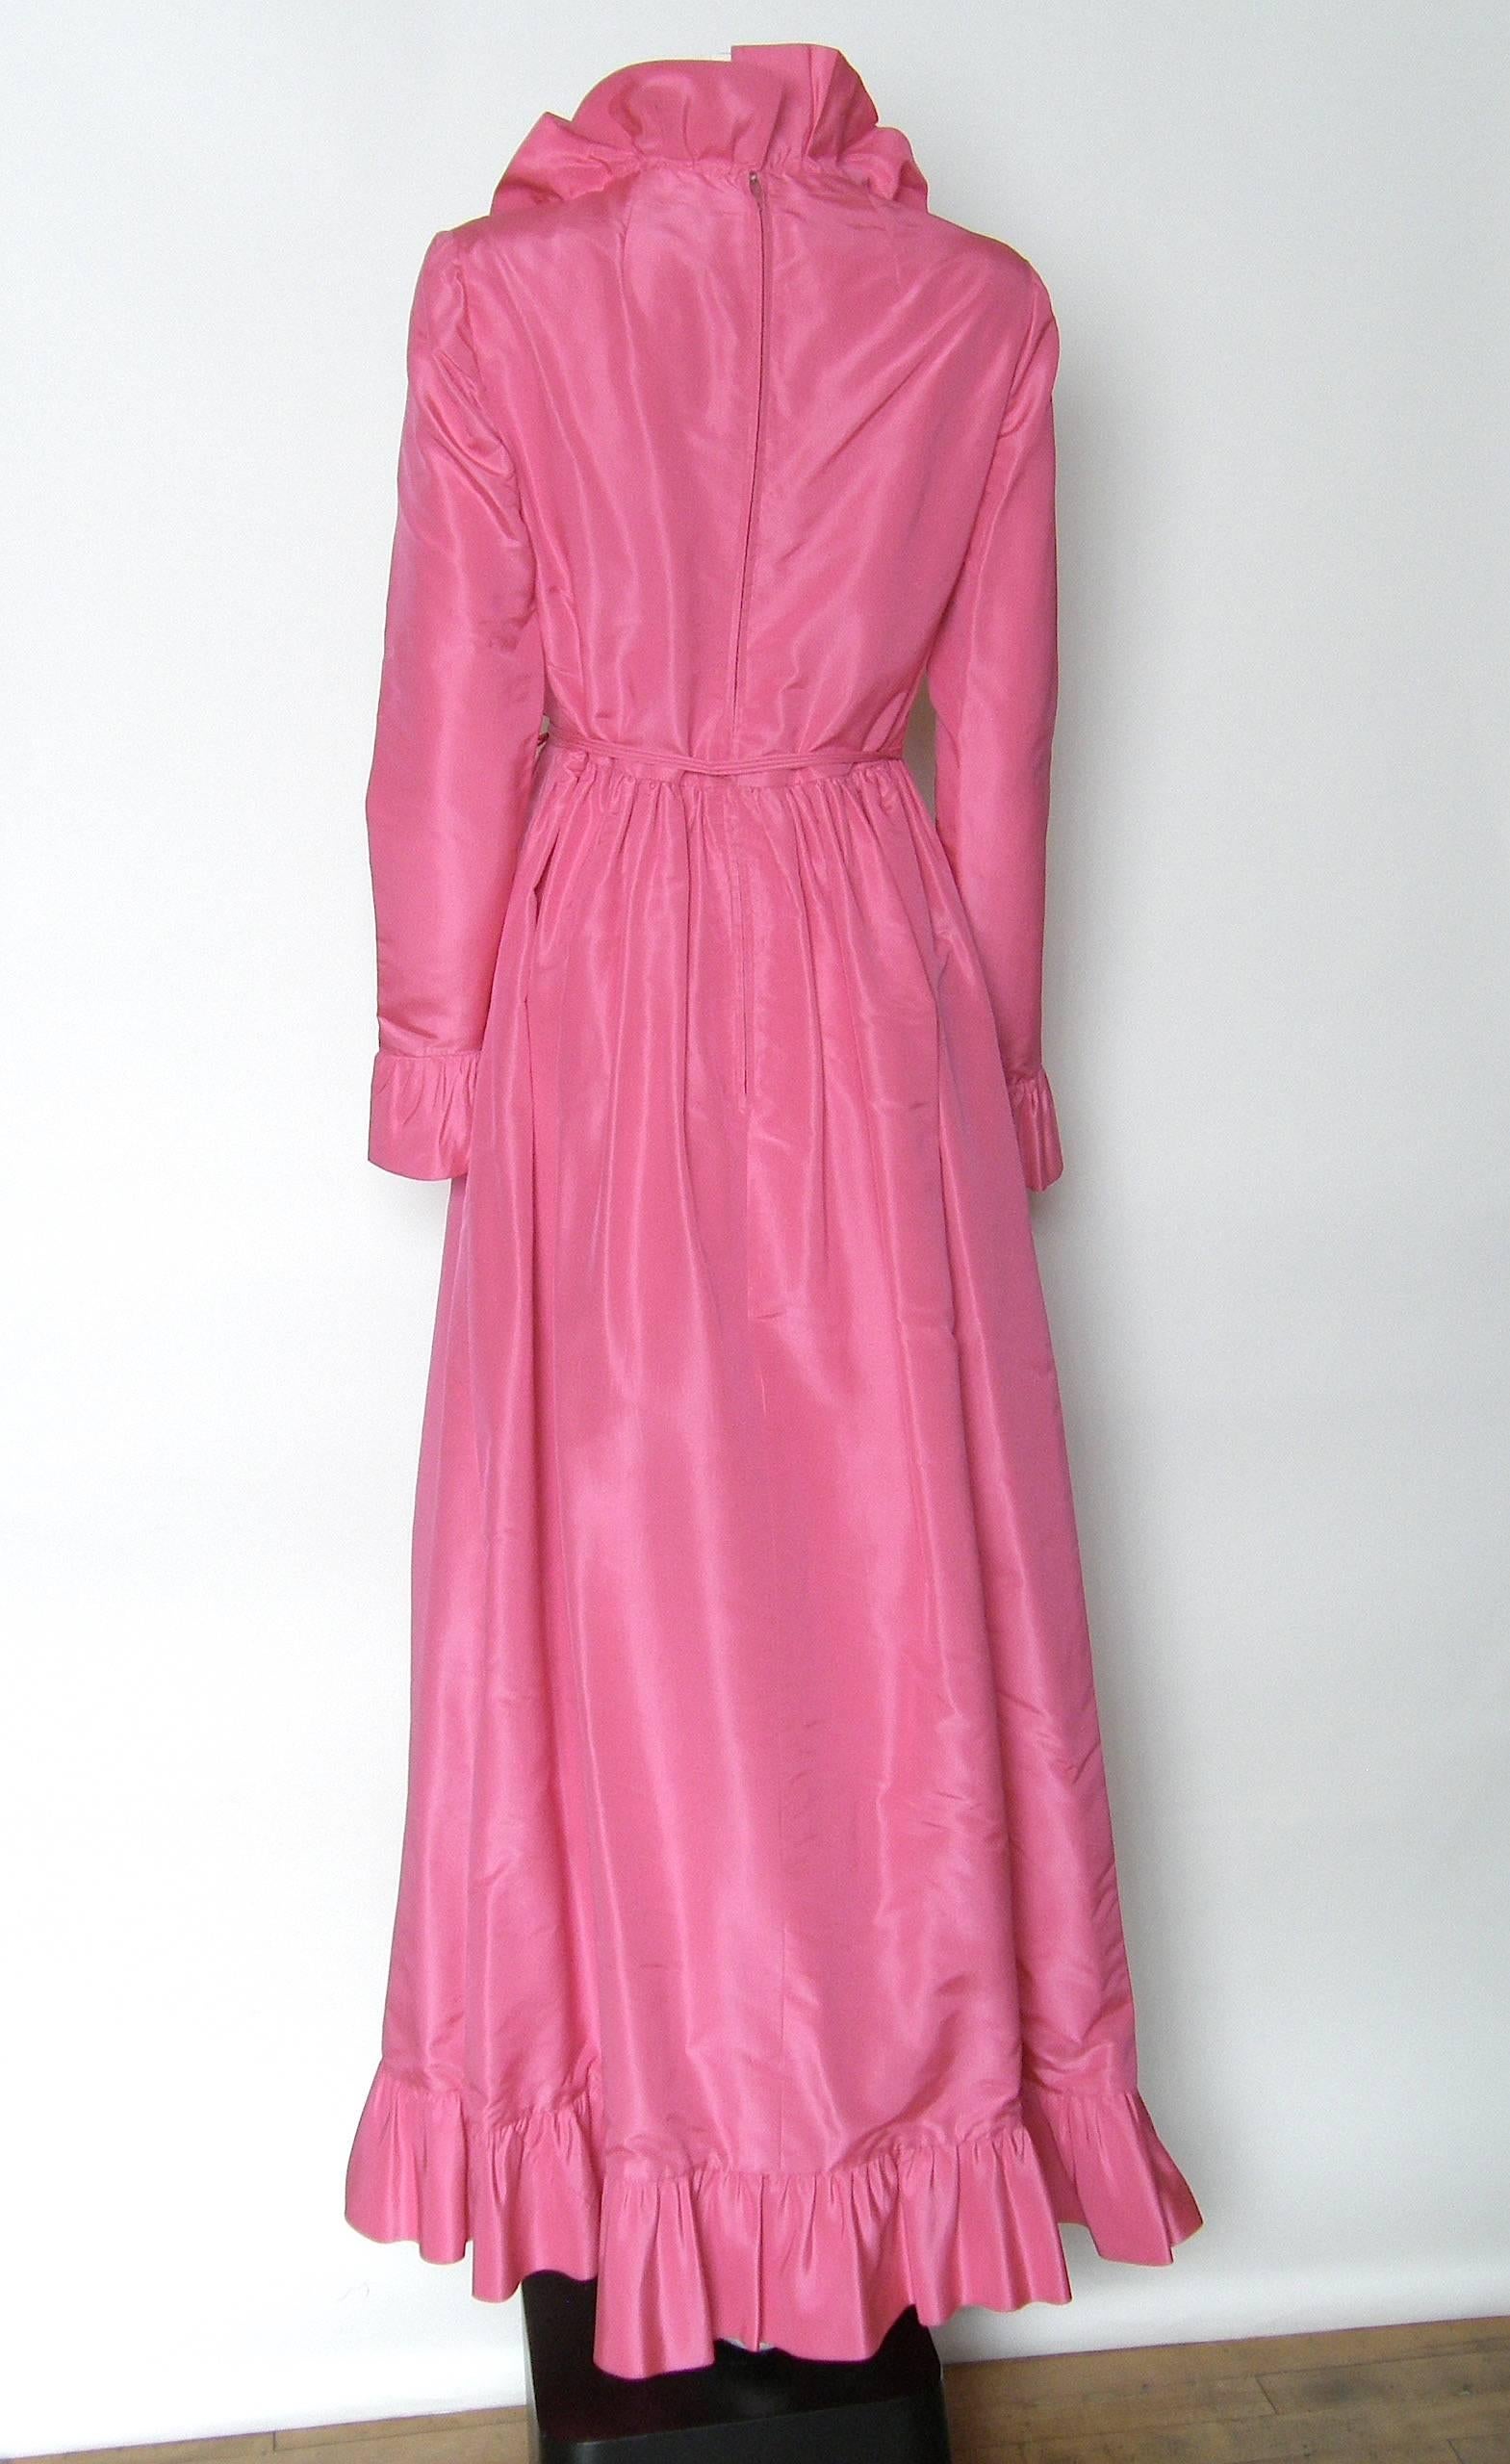 Mollie Parnis Pink Silk Gown Wrap Style with Ruffled Edges and Skirt Slit For Sale 3